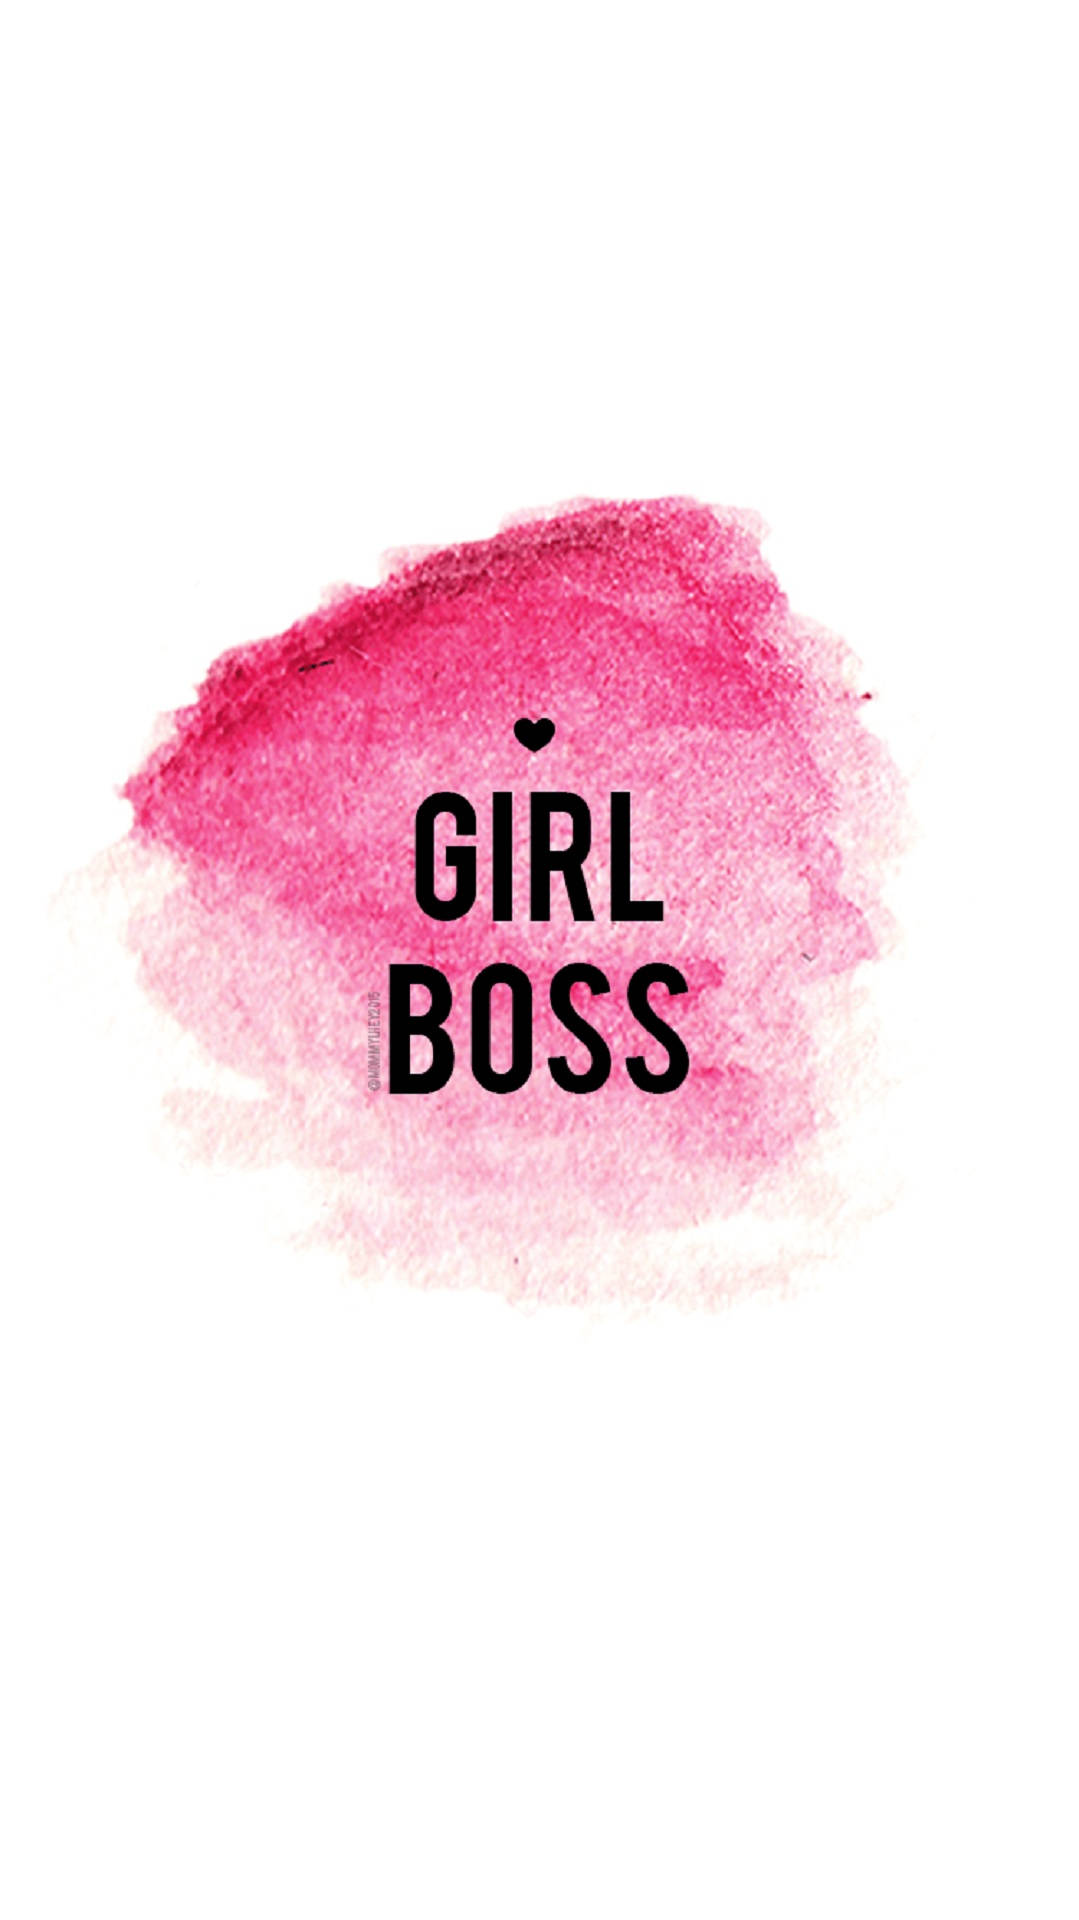 Ambitious and Stylish Girl Boss With Her Favorite Shade of Pink Lipstick Wallpaper